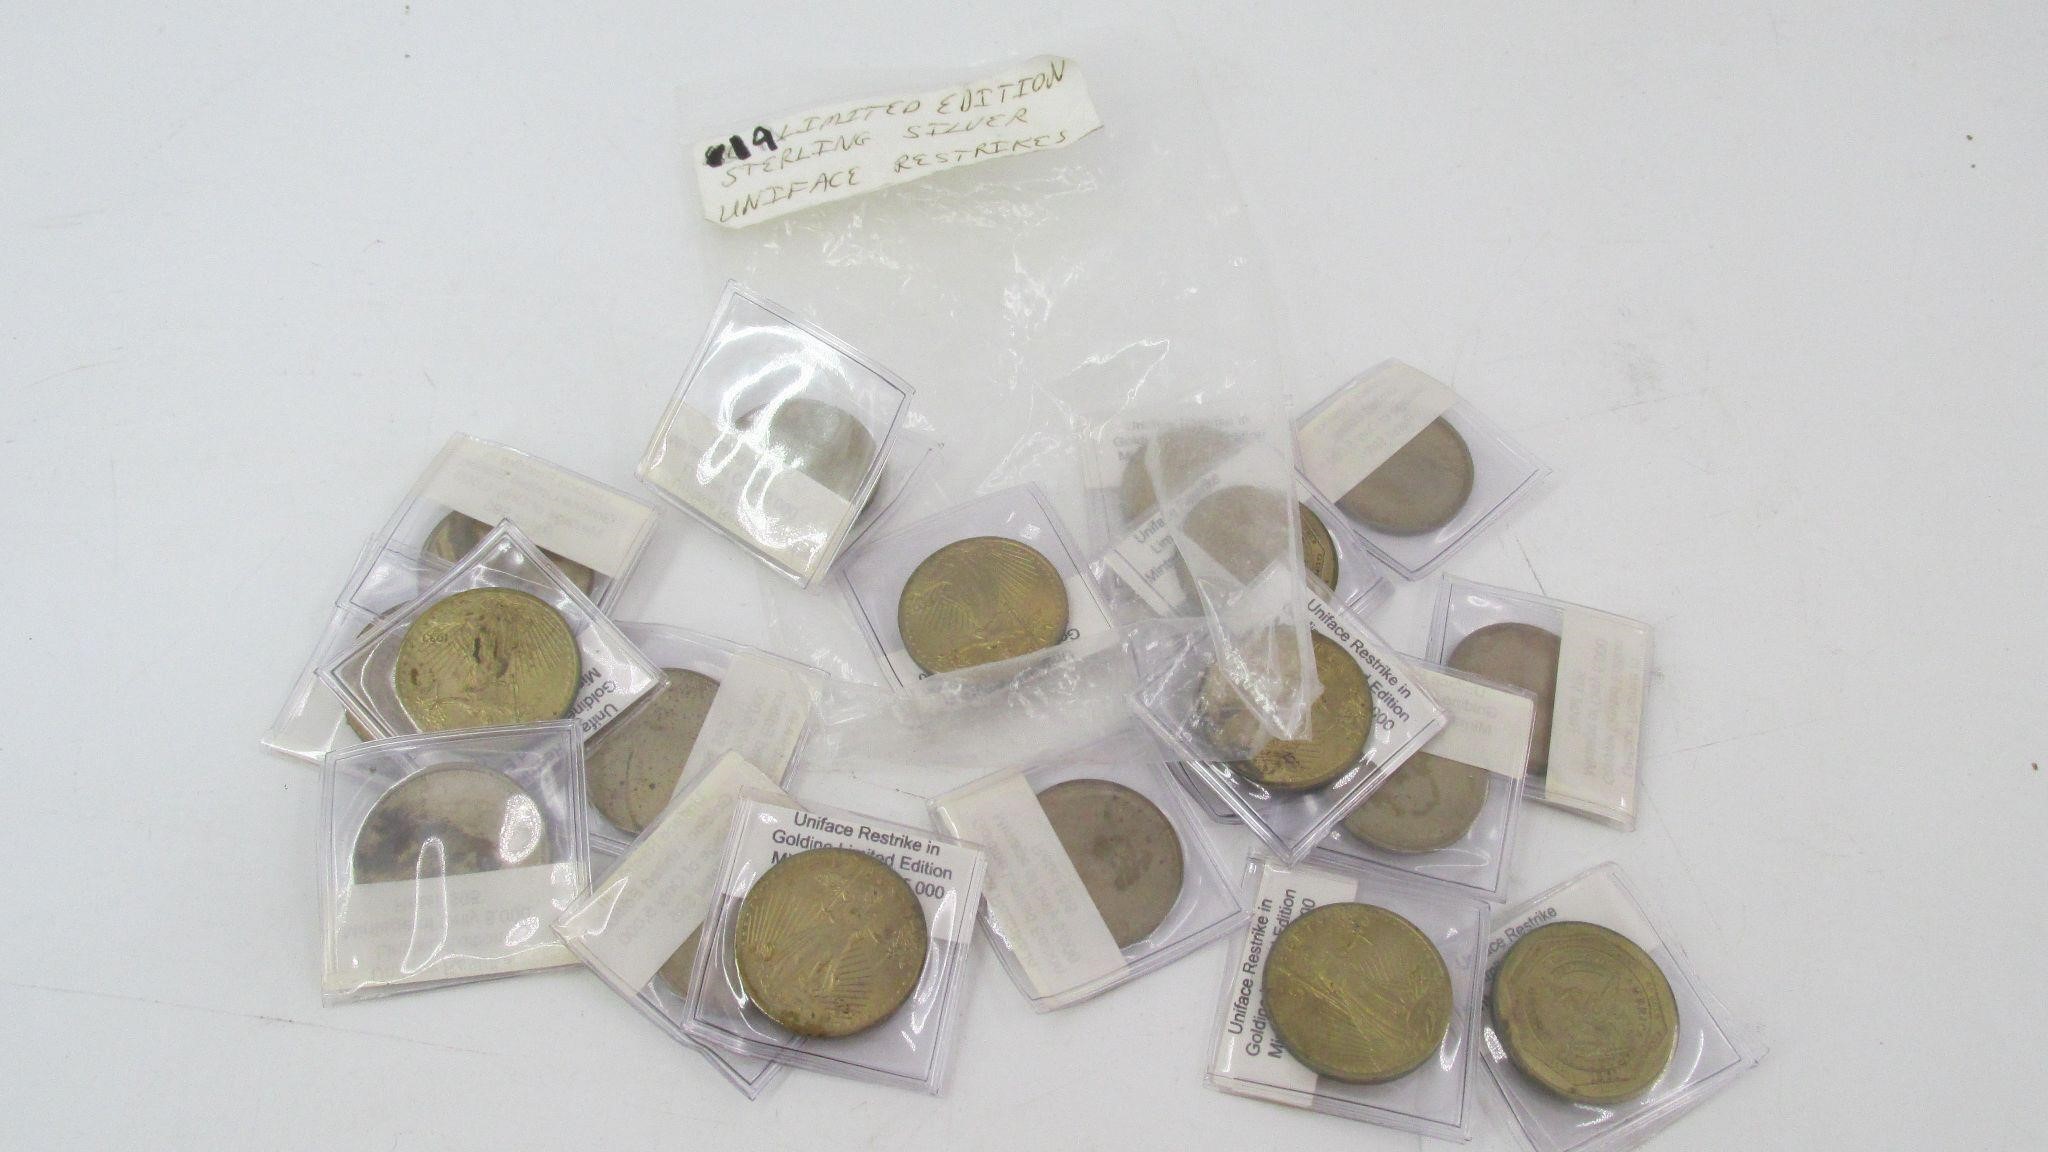 19 Lim Edition Sterling Silver Uniface Restrikes